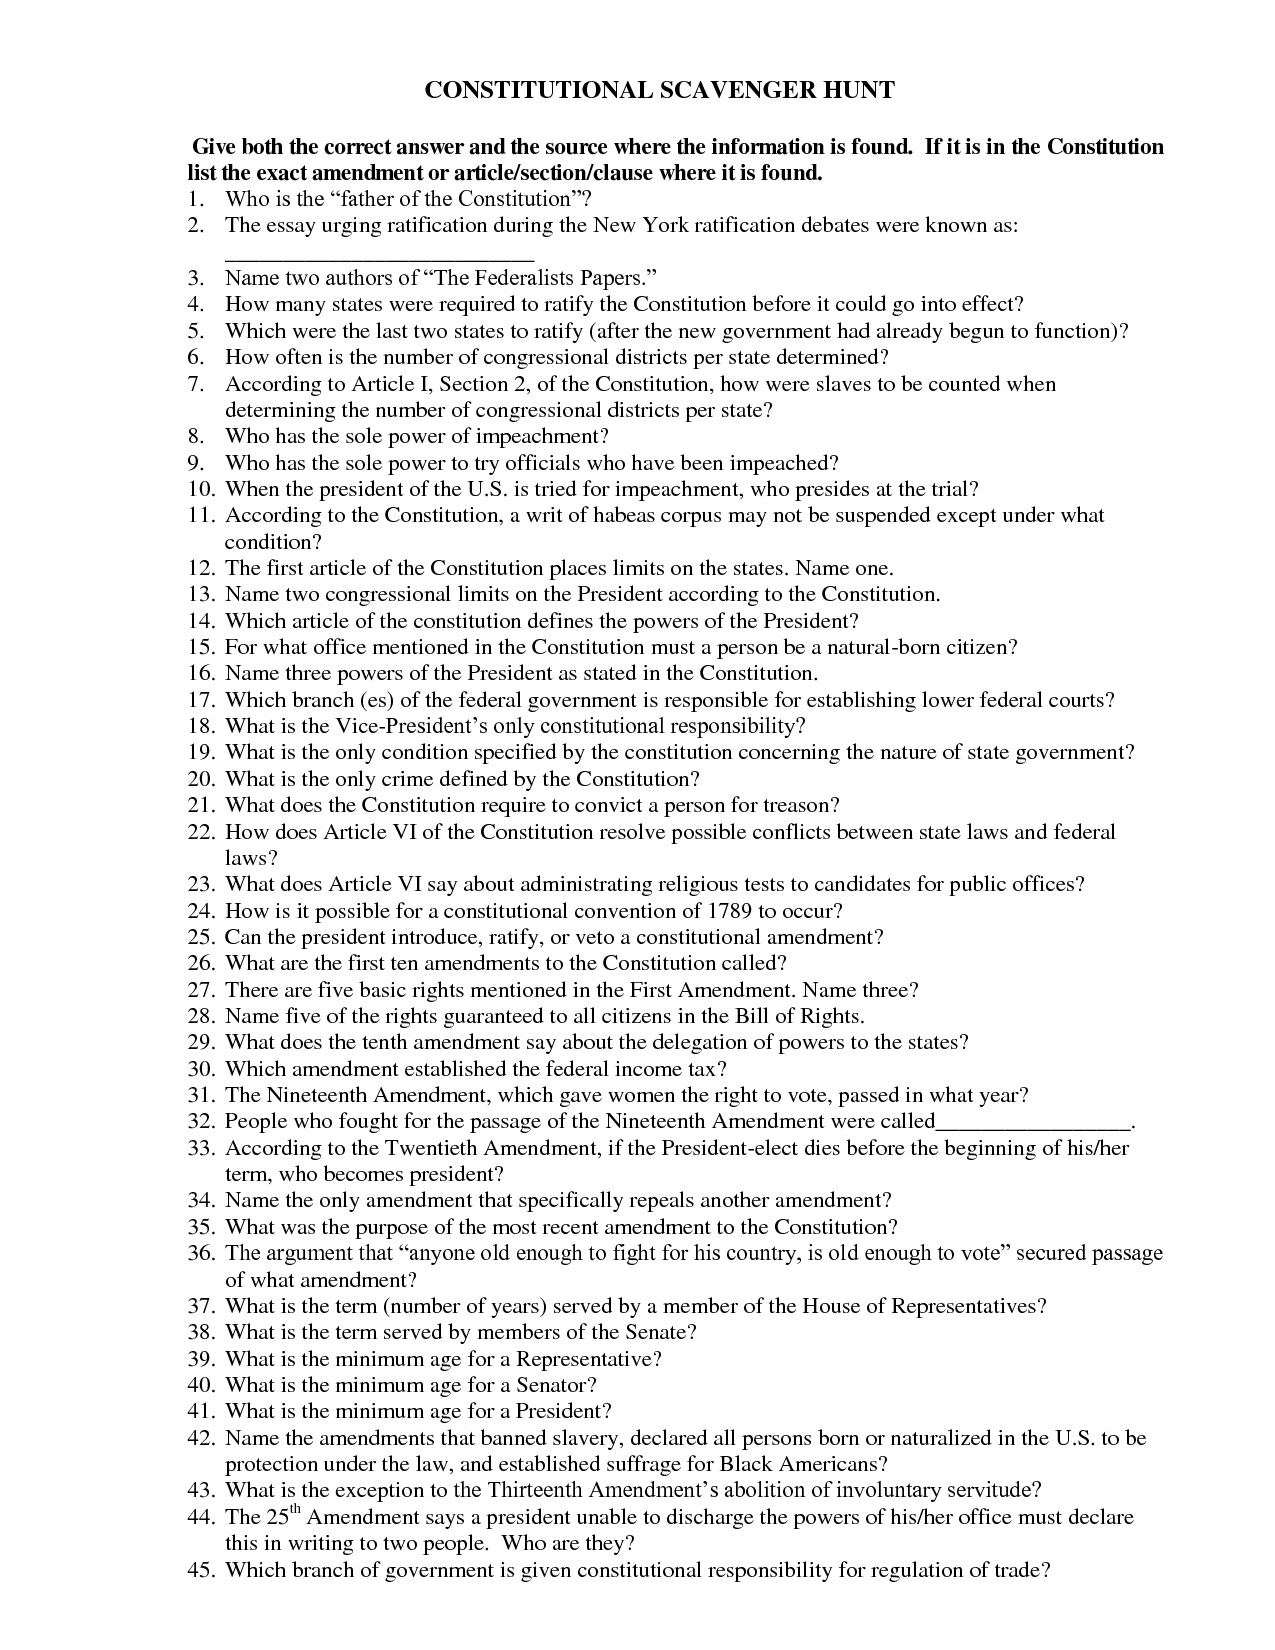 Constitutional Scavenger Hunt Answers Image